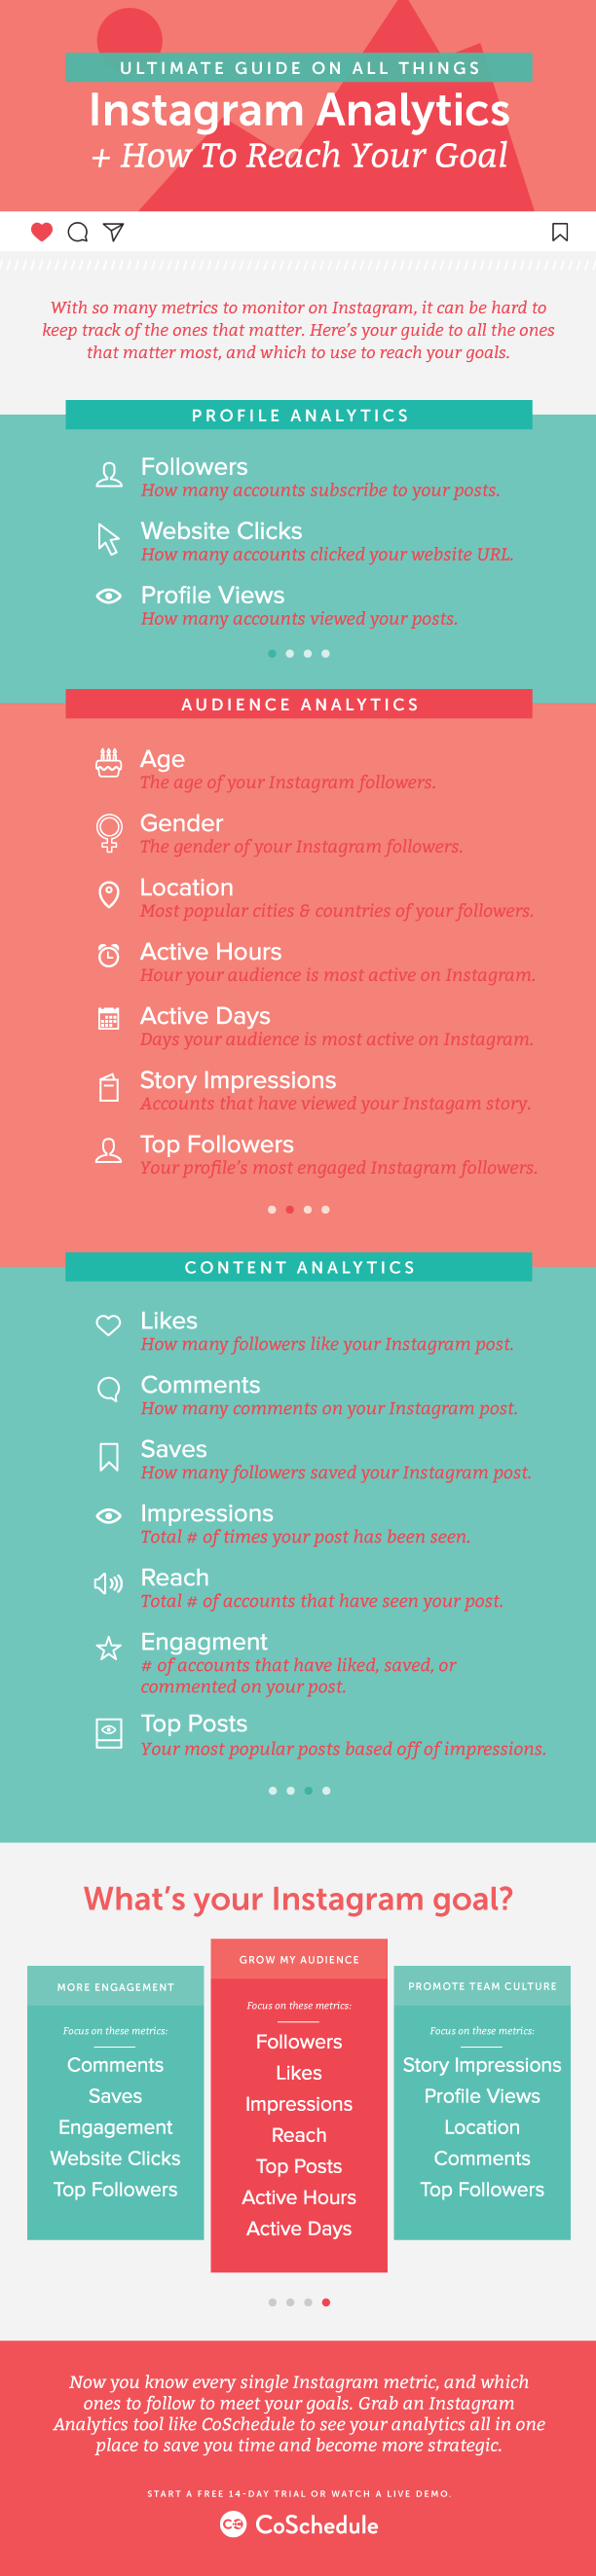 Everything You Need To Know About Instagram Analytics - #infographic